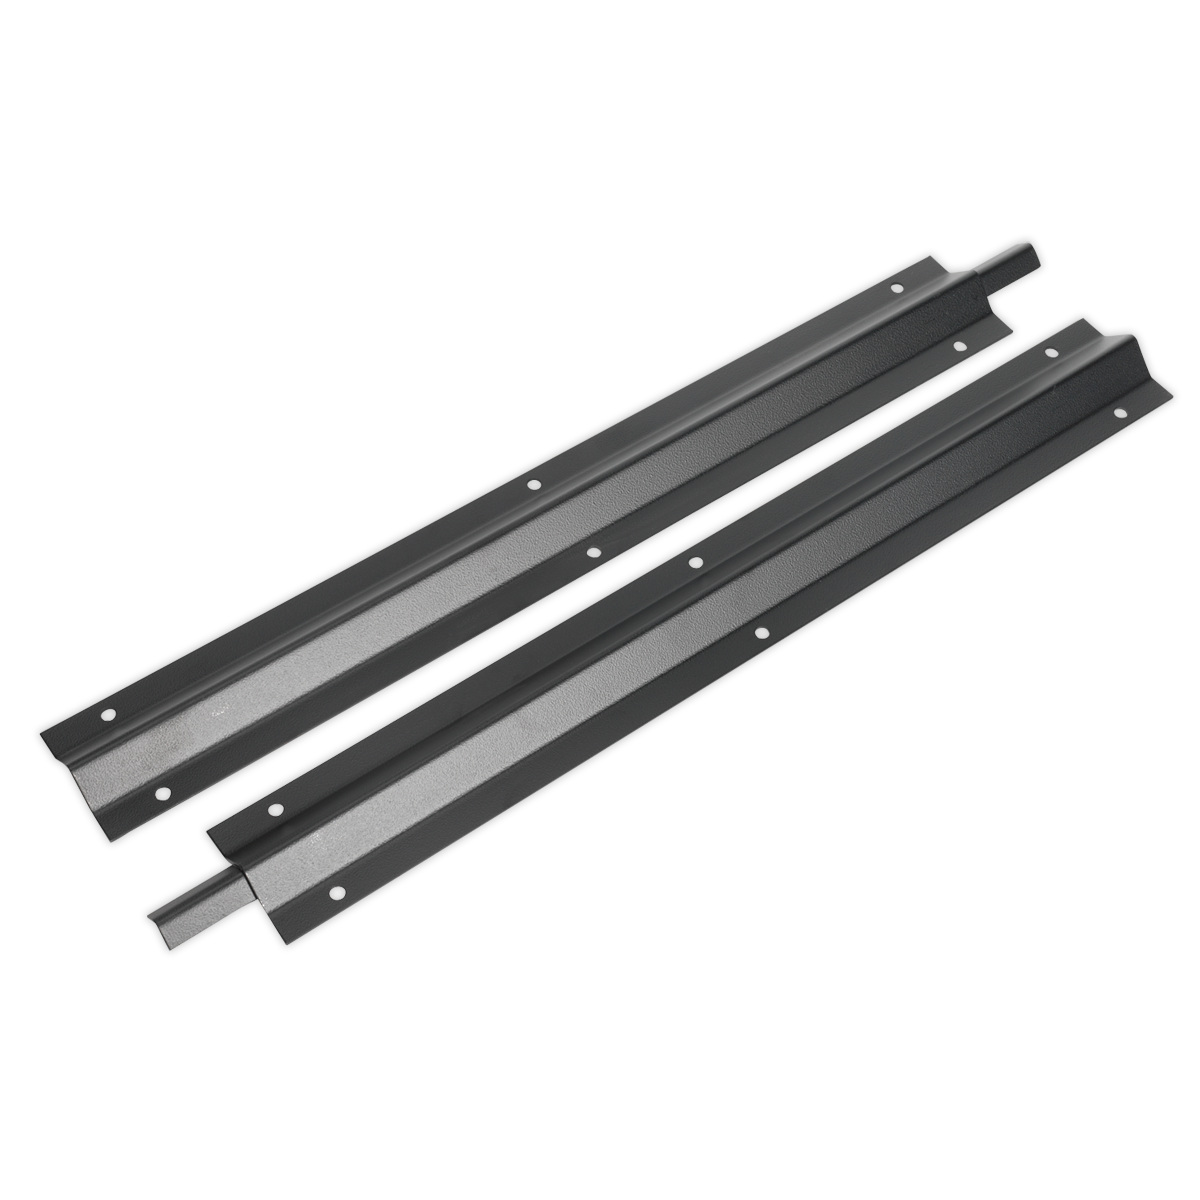 Sealey Extension Rail Set for HBS97 Series 700mm